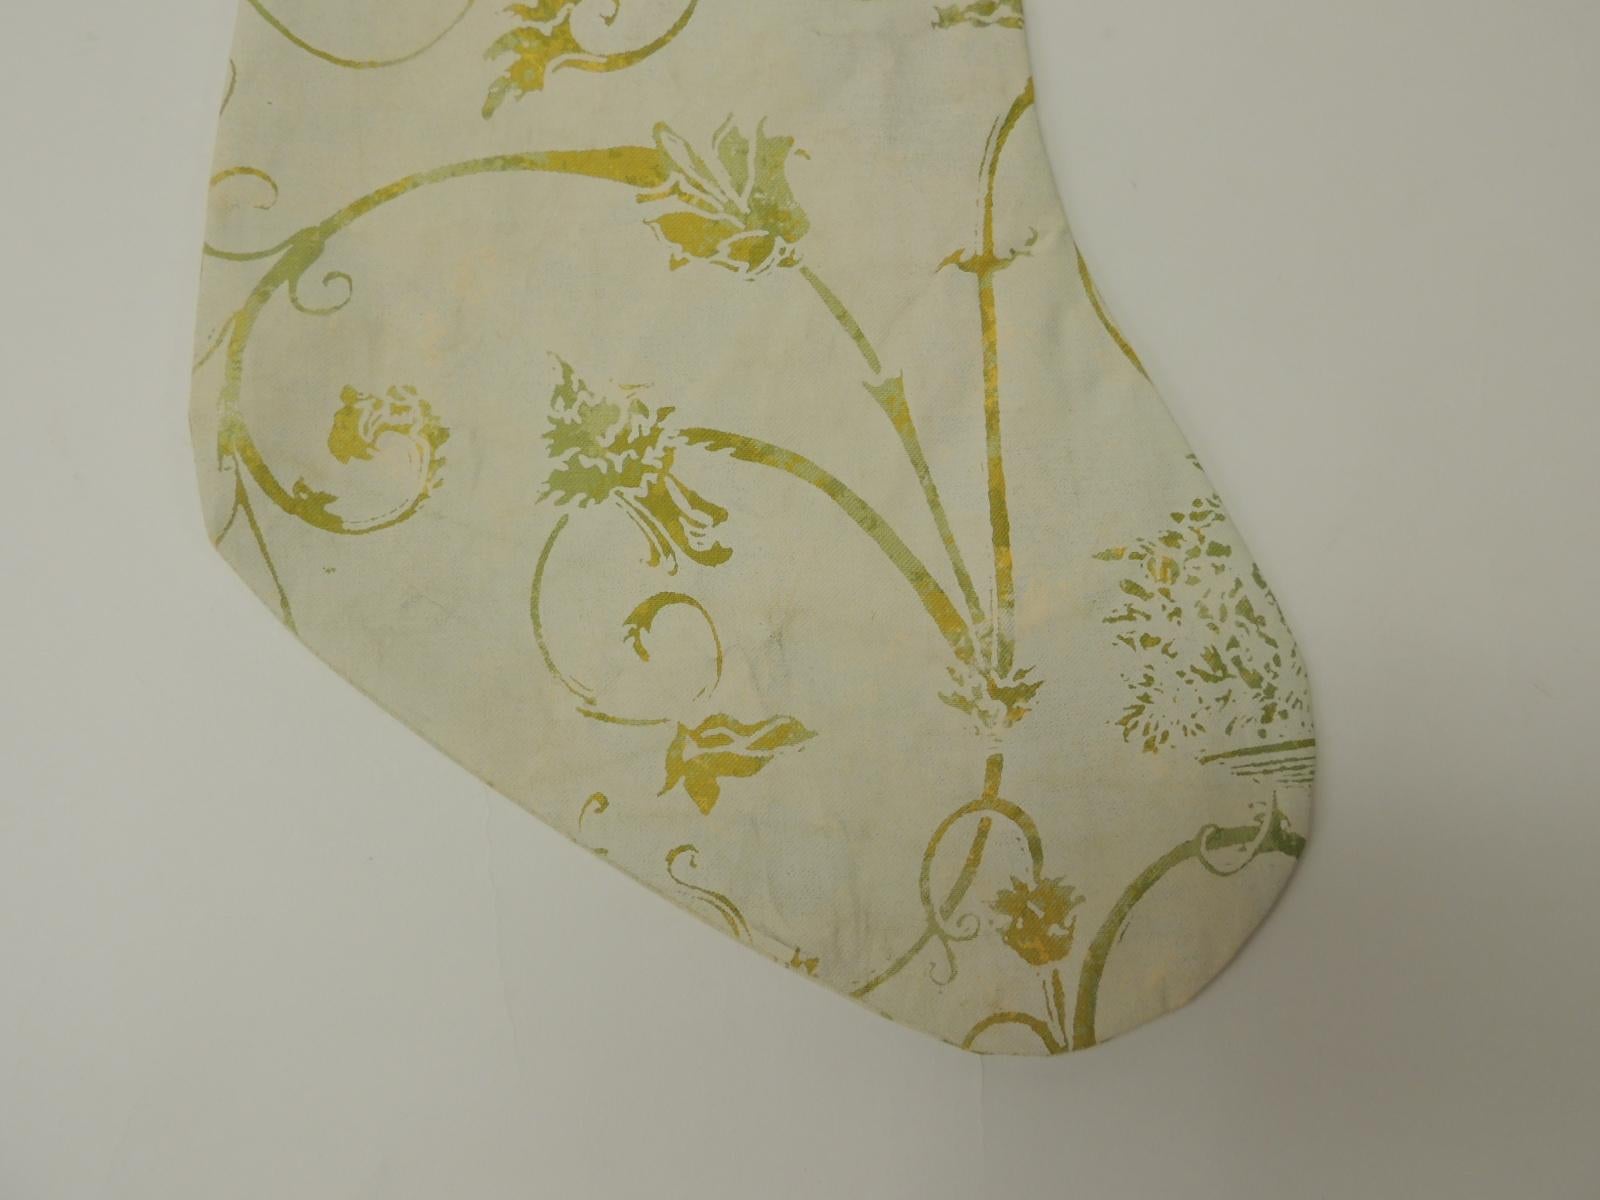 Artisanal holiday gift stocking.
Vintage Fortuny style screen printed in the USA, depicting birds of paradise and vines.
Doubled-sided, embellished with cotton green ribbon same as hanging hook.
Interlined with cotton fabric.
Limited edition of